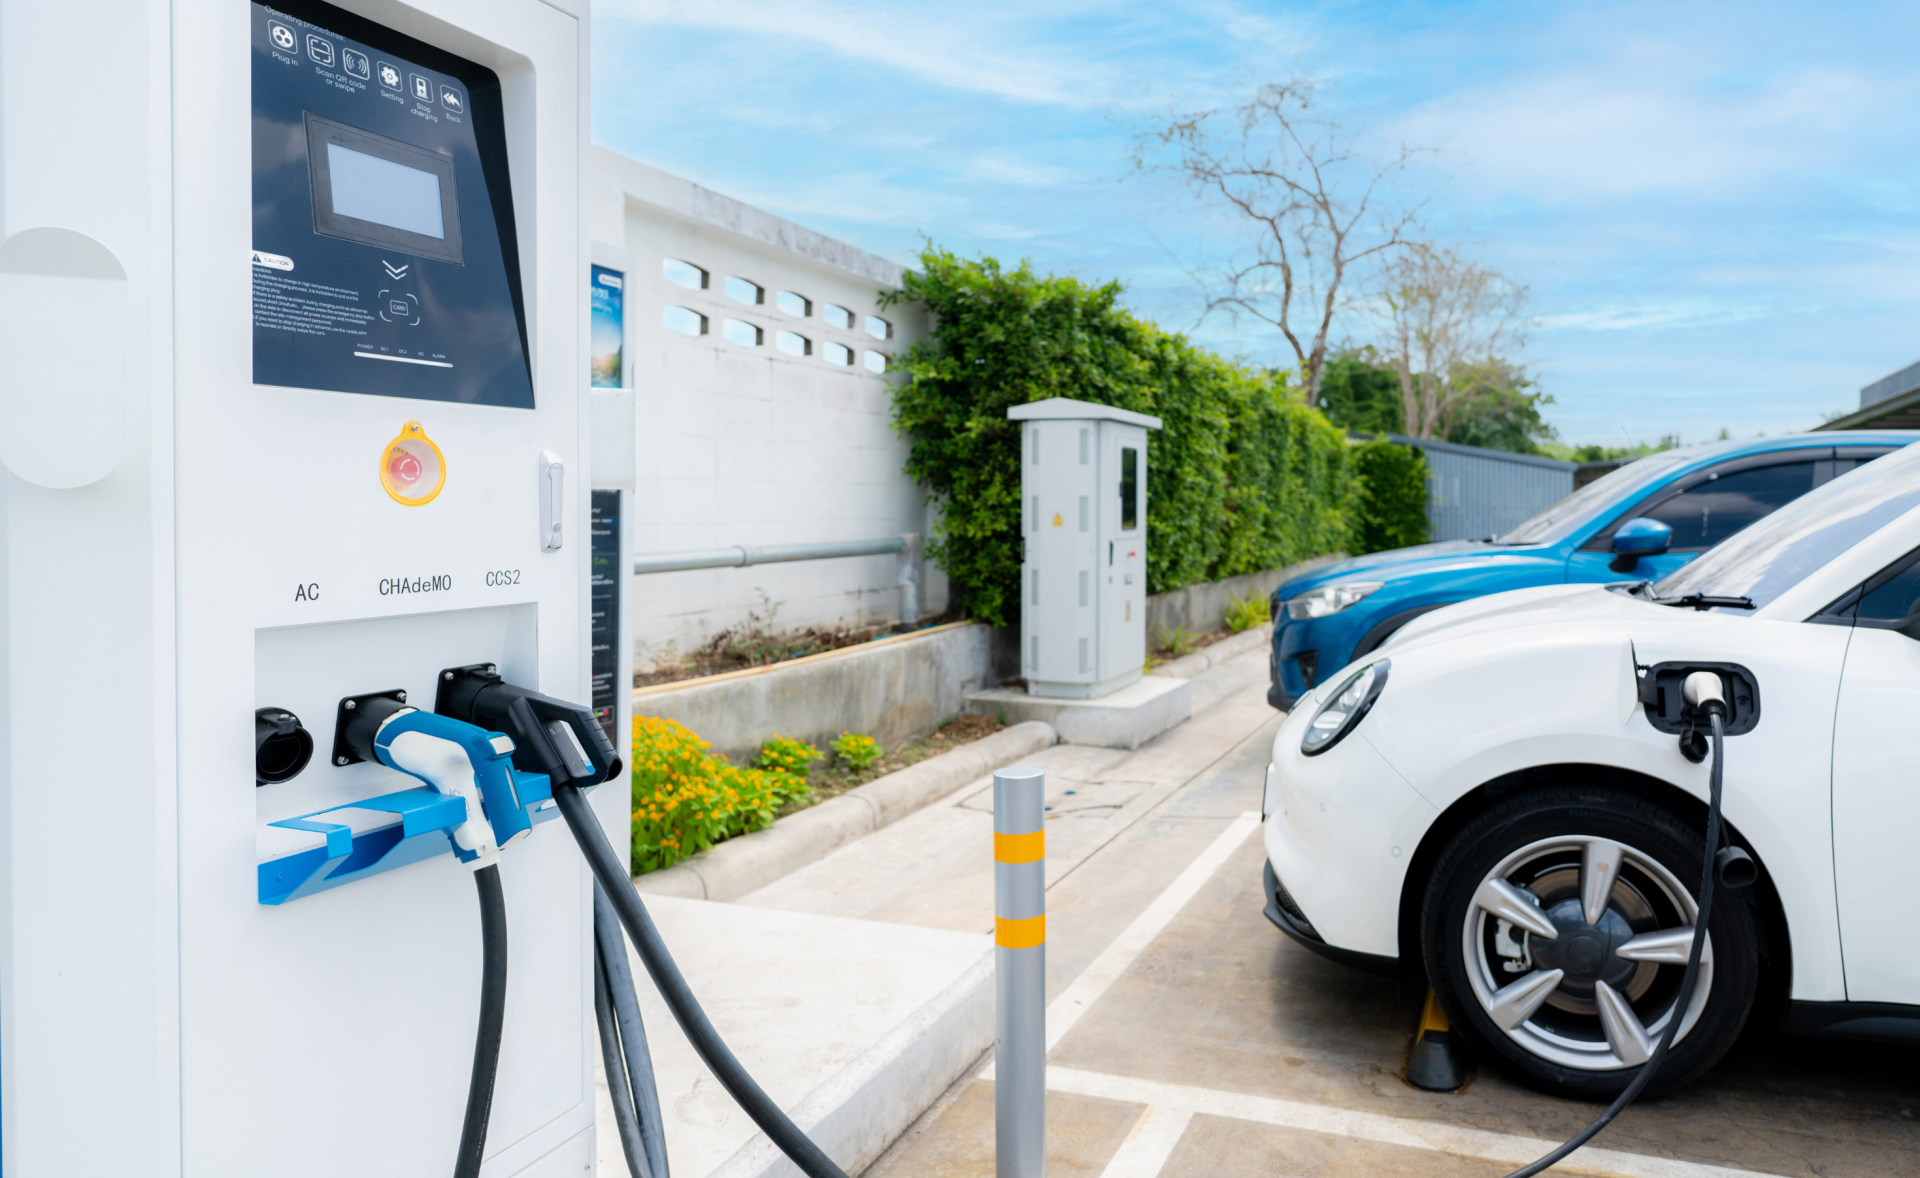 Milestone moment in transition to electric vehicles